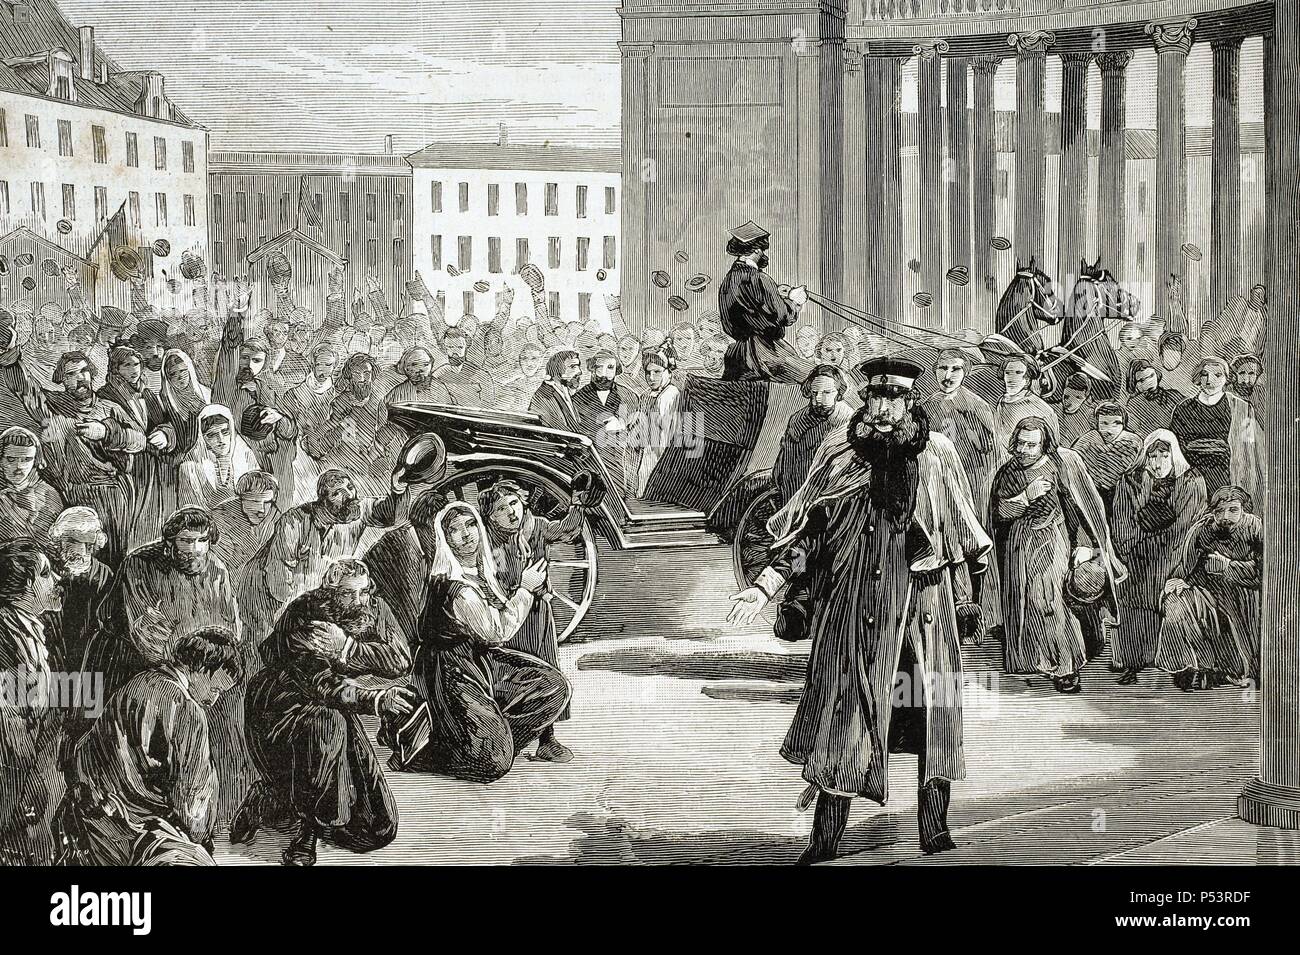 Russia. St. Petersburg. 19th century. Ovation of the people to the Czar in the portico of the Kasanski church after being the victim of an attack. Engraving. 'The Spanish and American Illustration,' 1879. Stock Photo